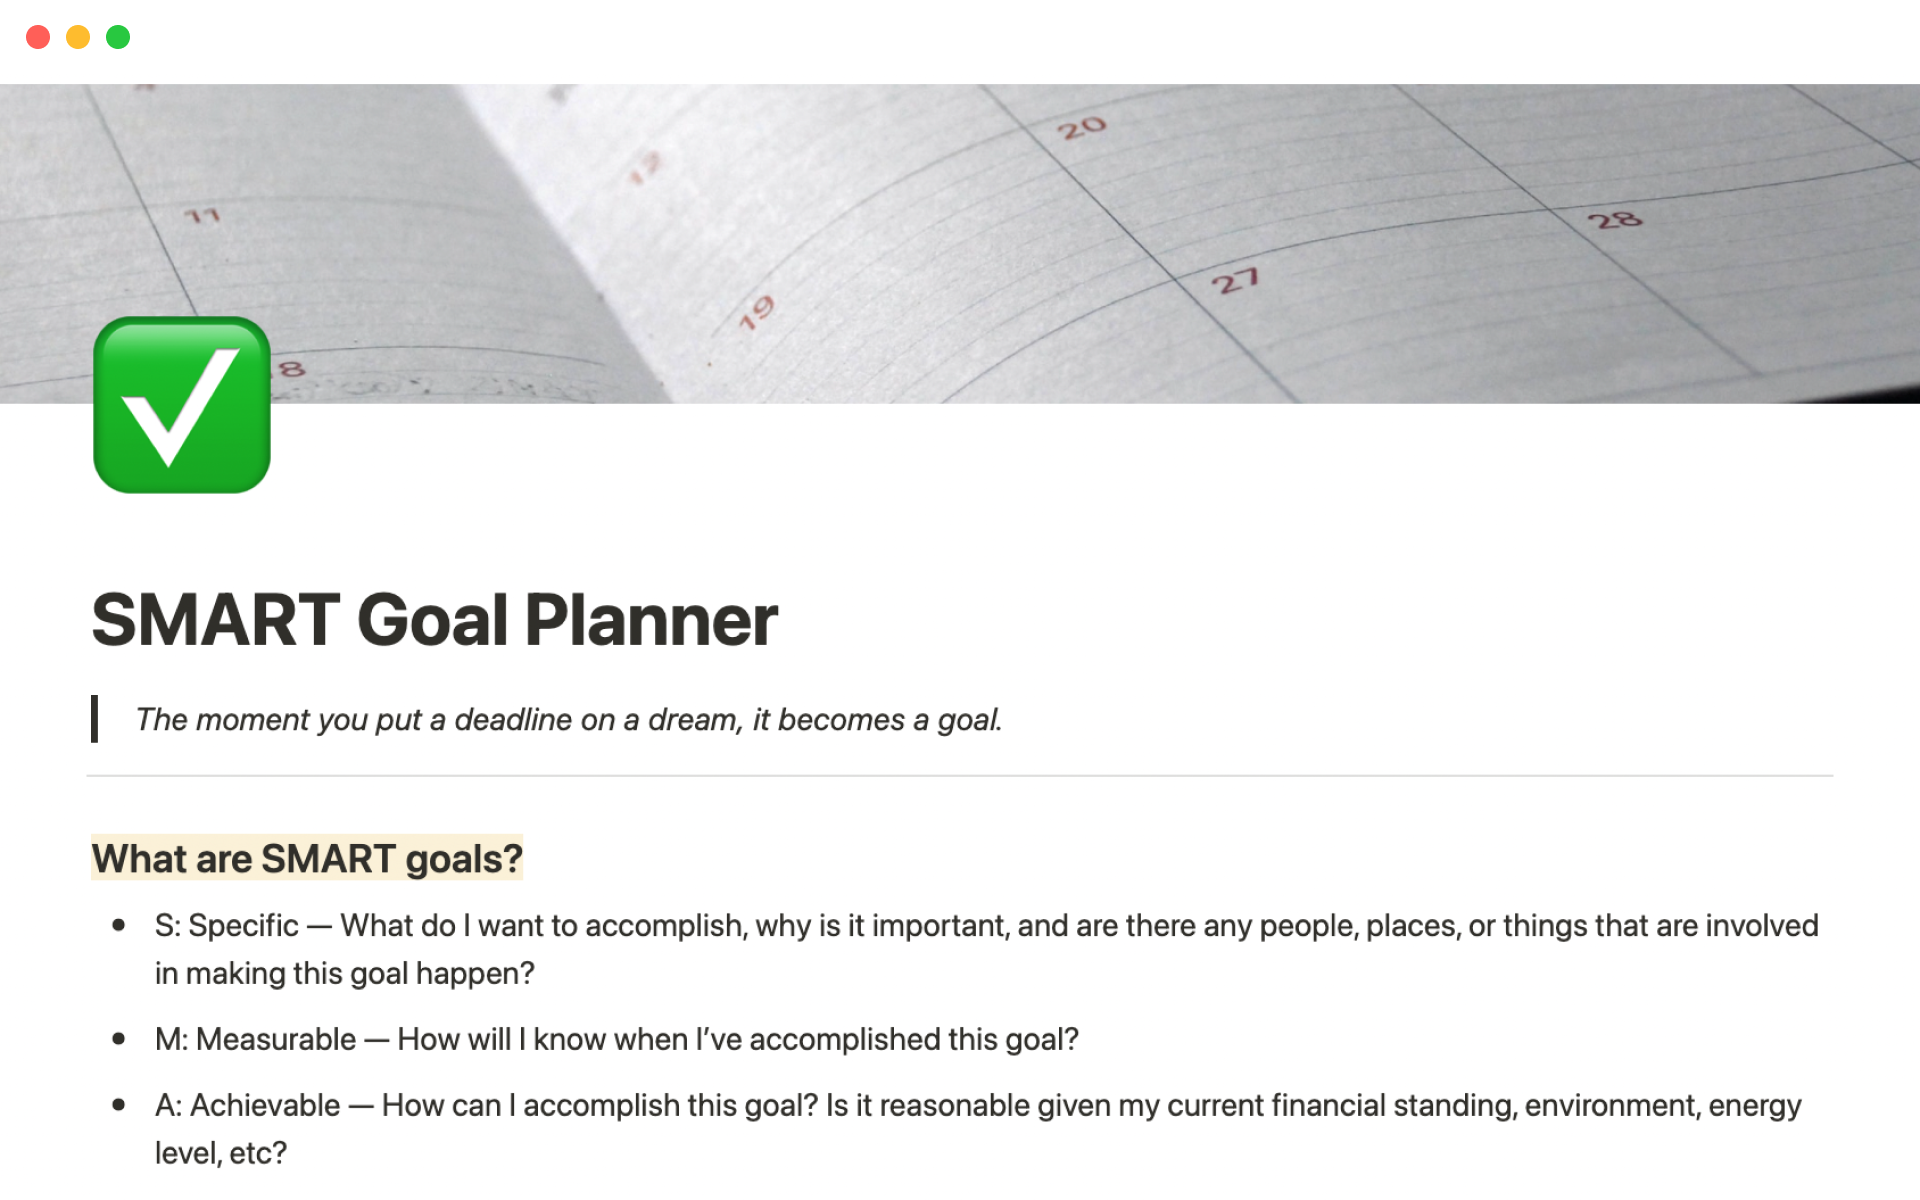 This template will help you plan, track, and meet your goals.